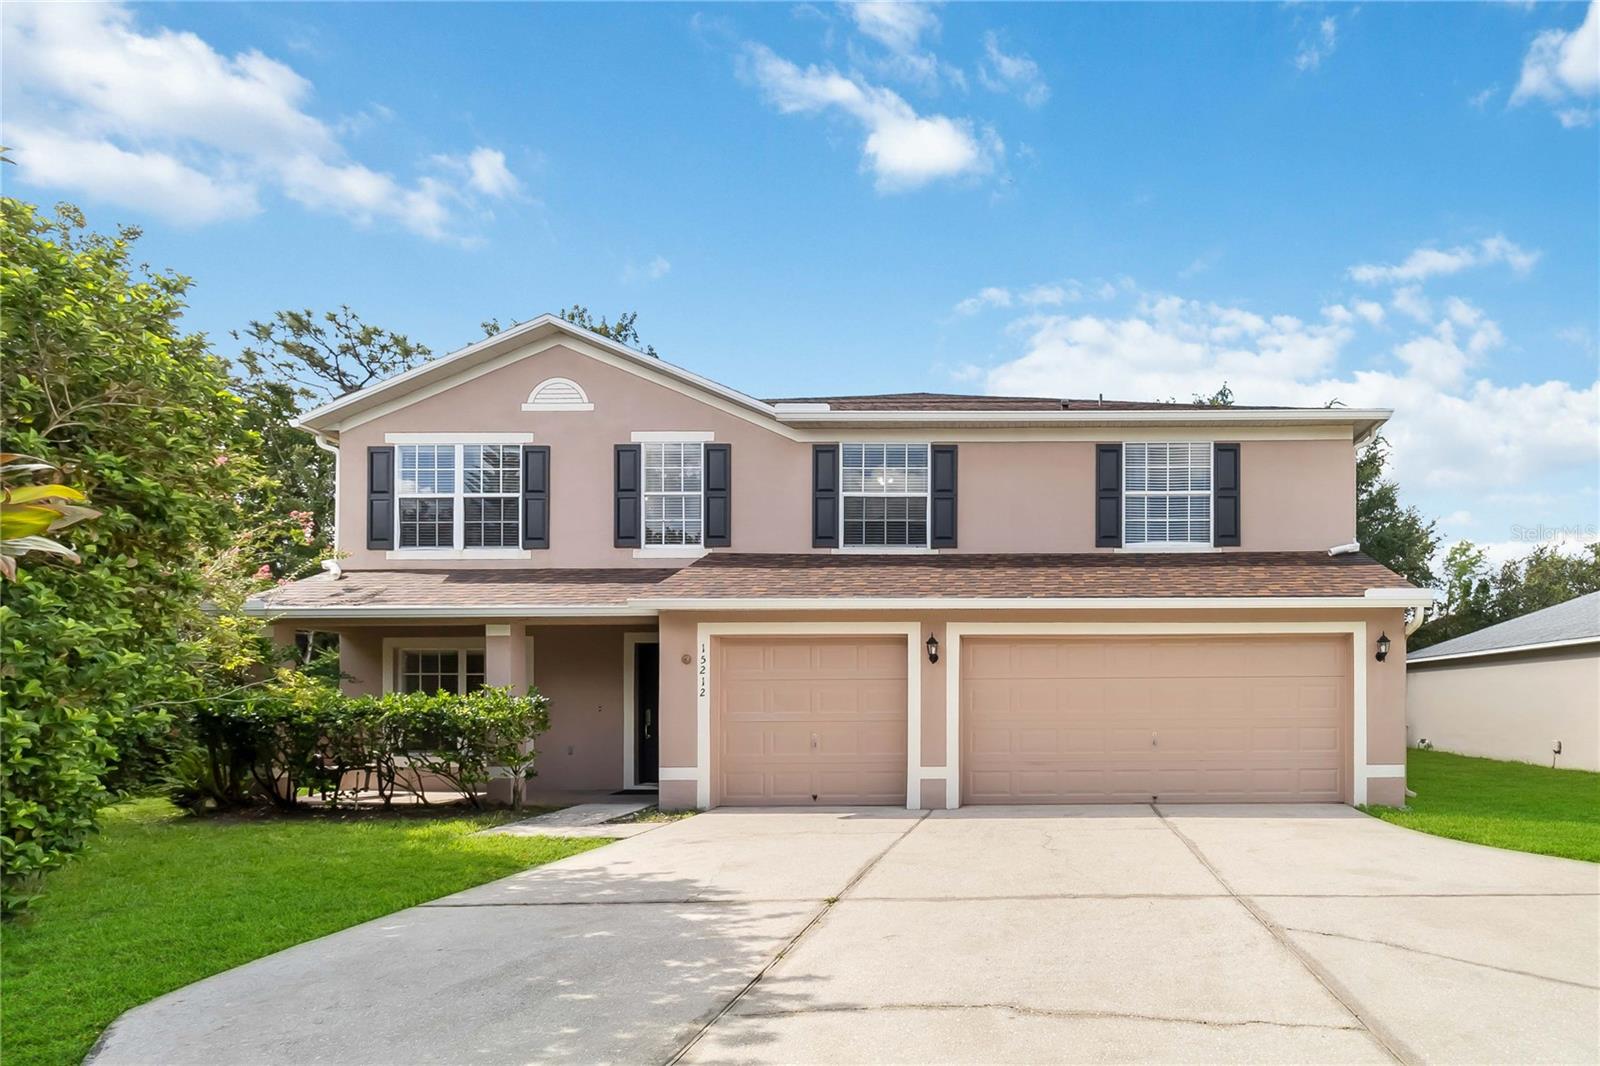 15212 MOULTRIE POINTE ROAD, 7 Bedrooms Bedrooms, ,4 BathroomsBathrooms,Residential,For Sale,MOULTRIE POINTE,MFRO6133539